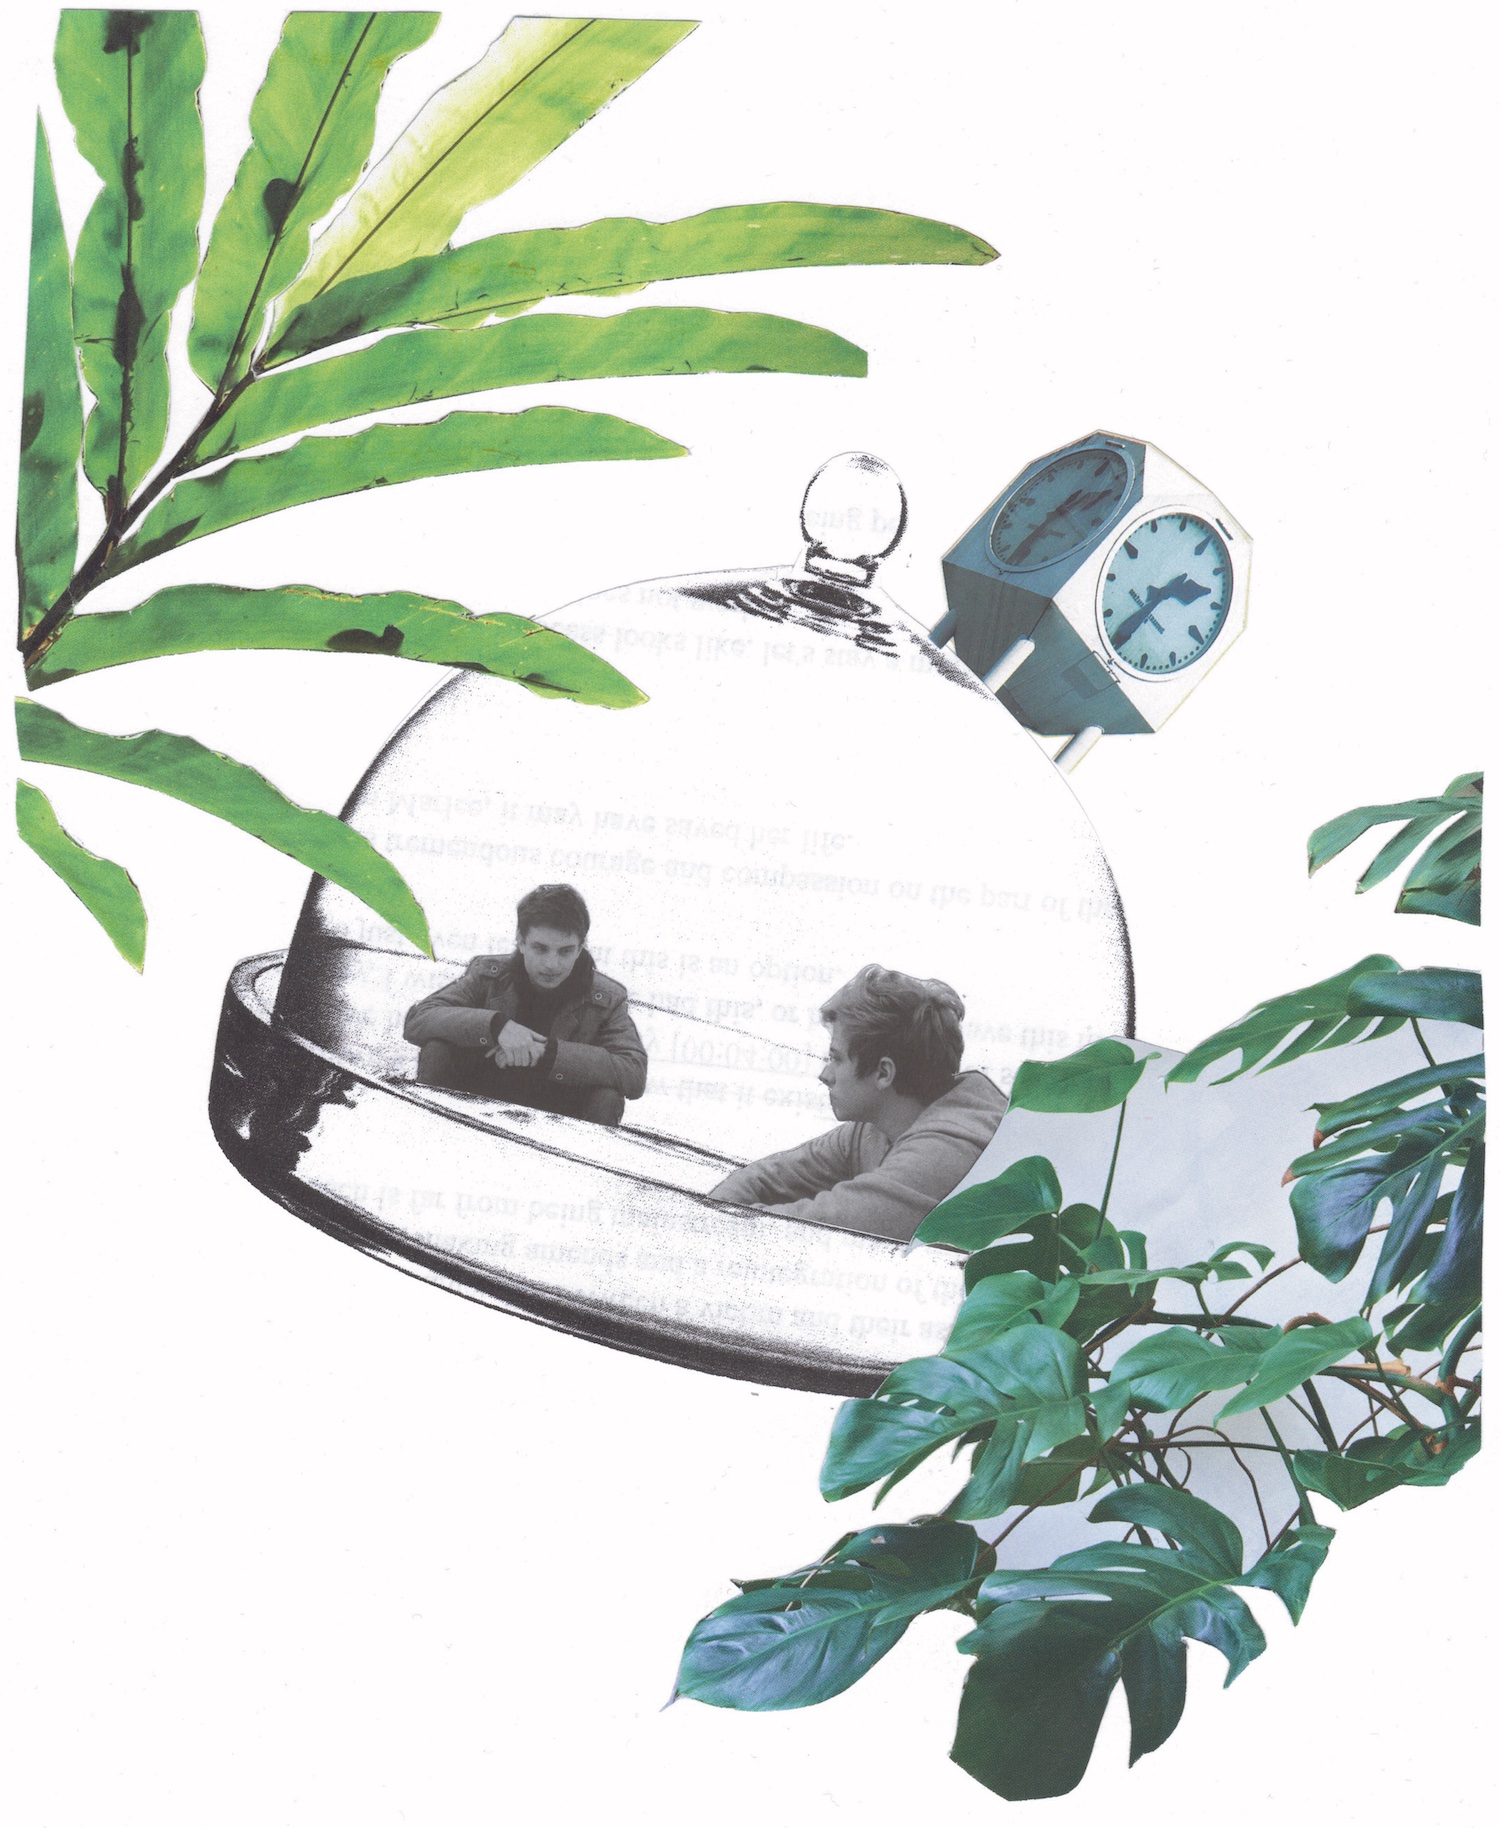 Two young men stare intently at each other, held within a glass dome. A clock sprouts from the top of the dome, the time reads half past one. Green plants sprout from either side of the image, encircling the central moment.